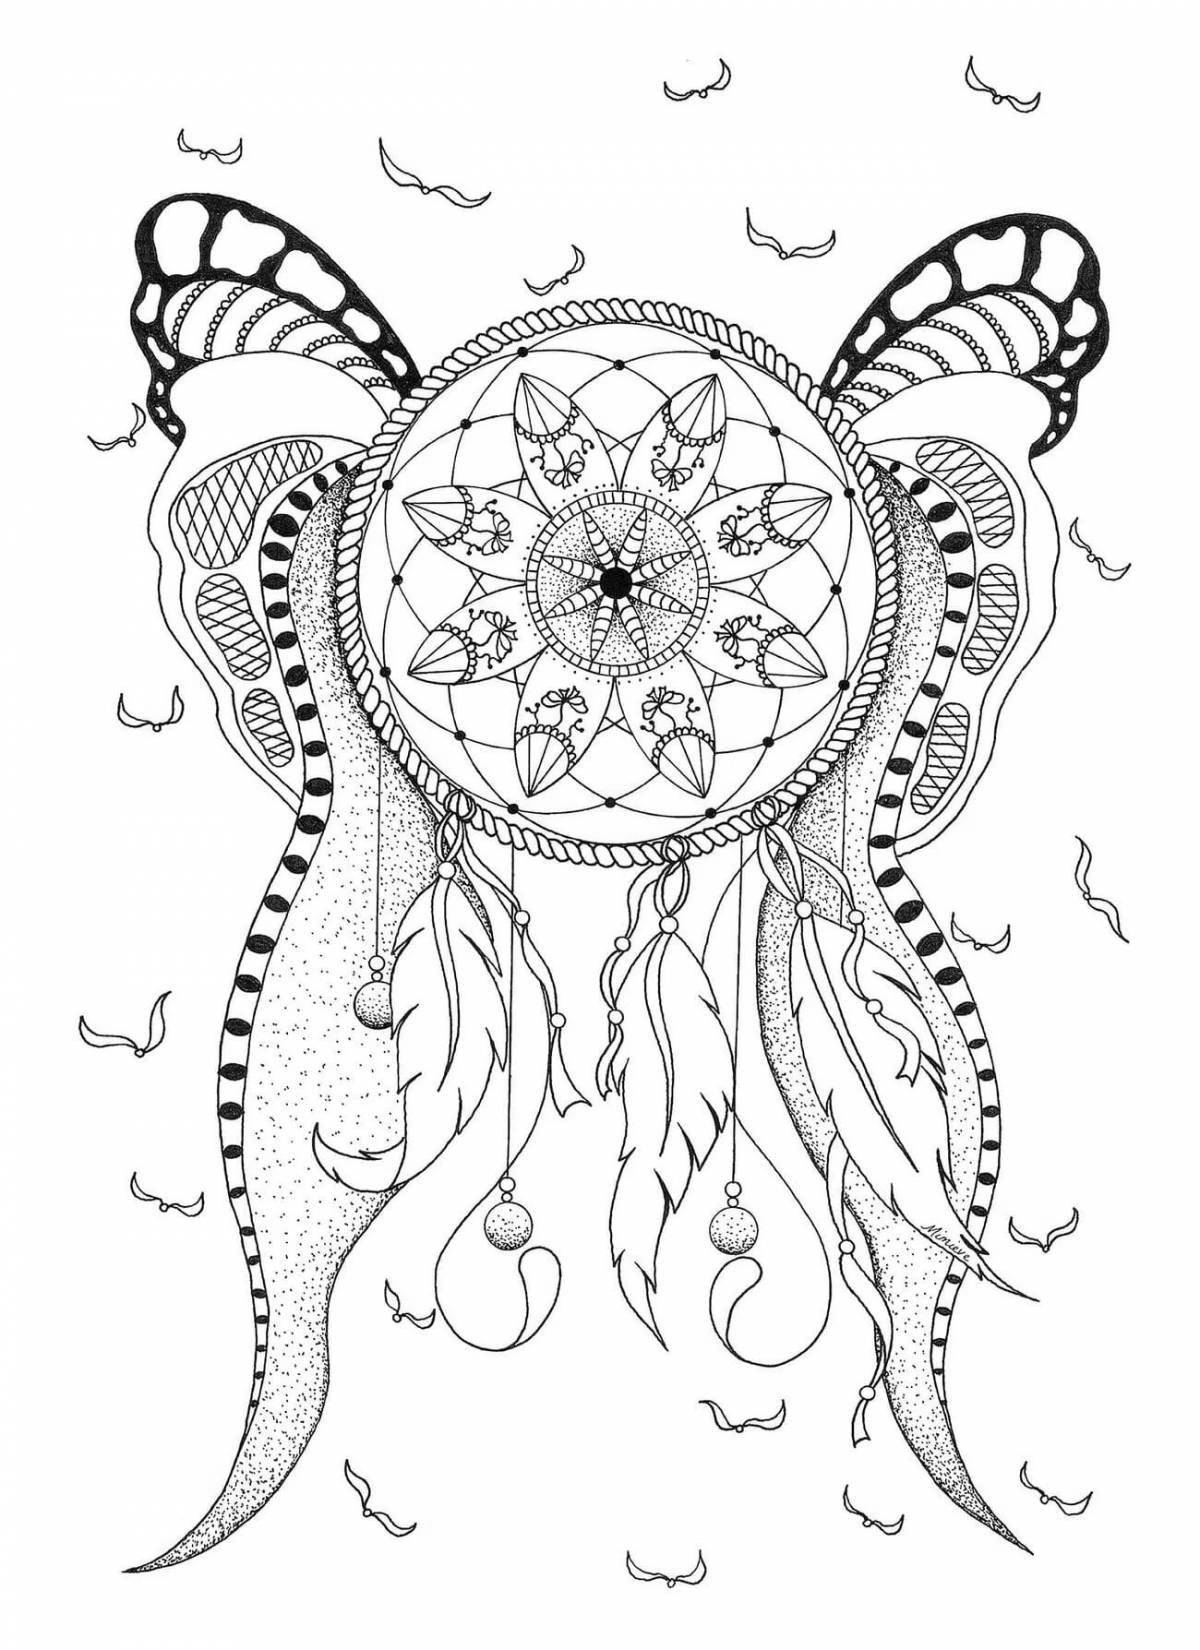 Stylish dreamcatcher coloring book